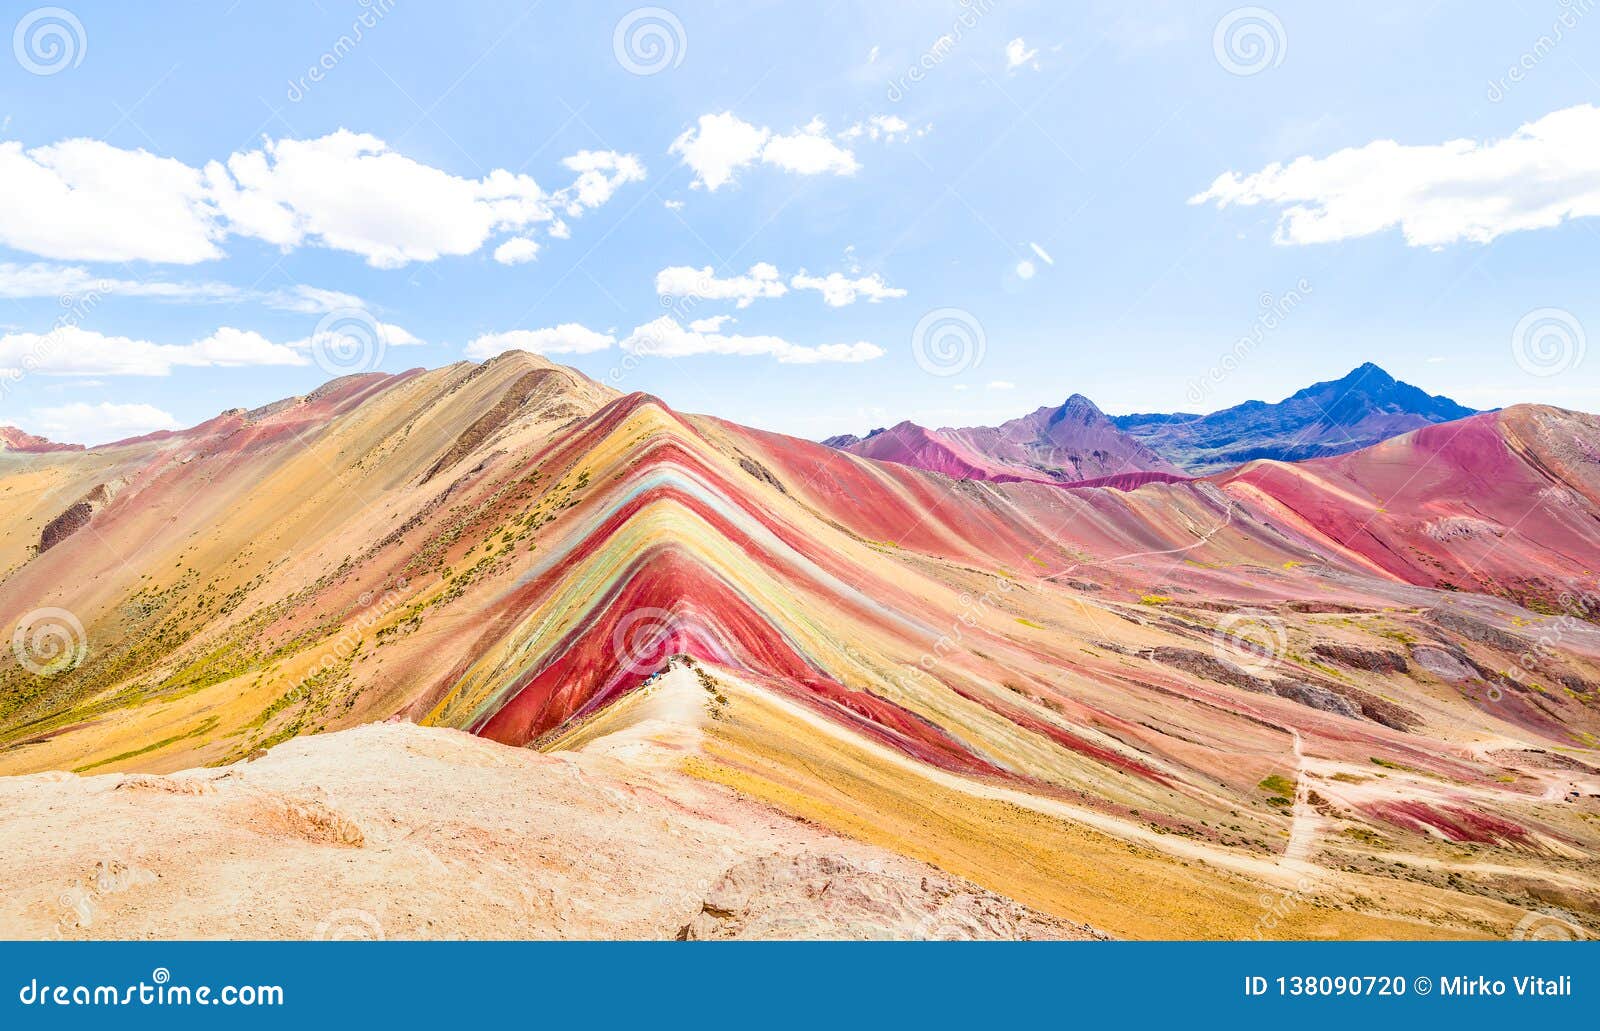 panoramic view of rainbow mountain at vinicunca mount in peru - travel and wanderlust concept exploring world nature wonders -